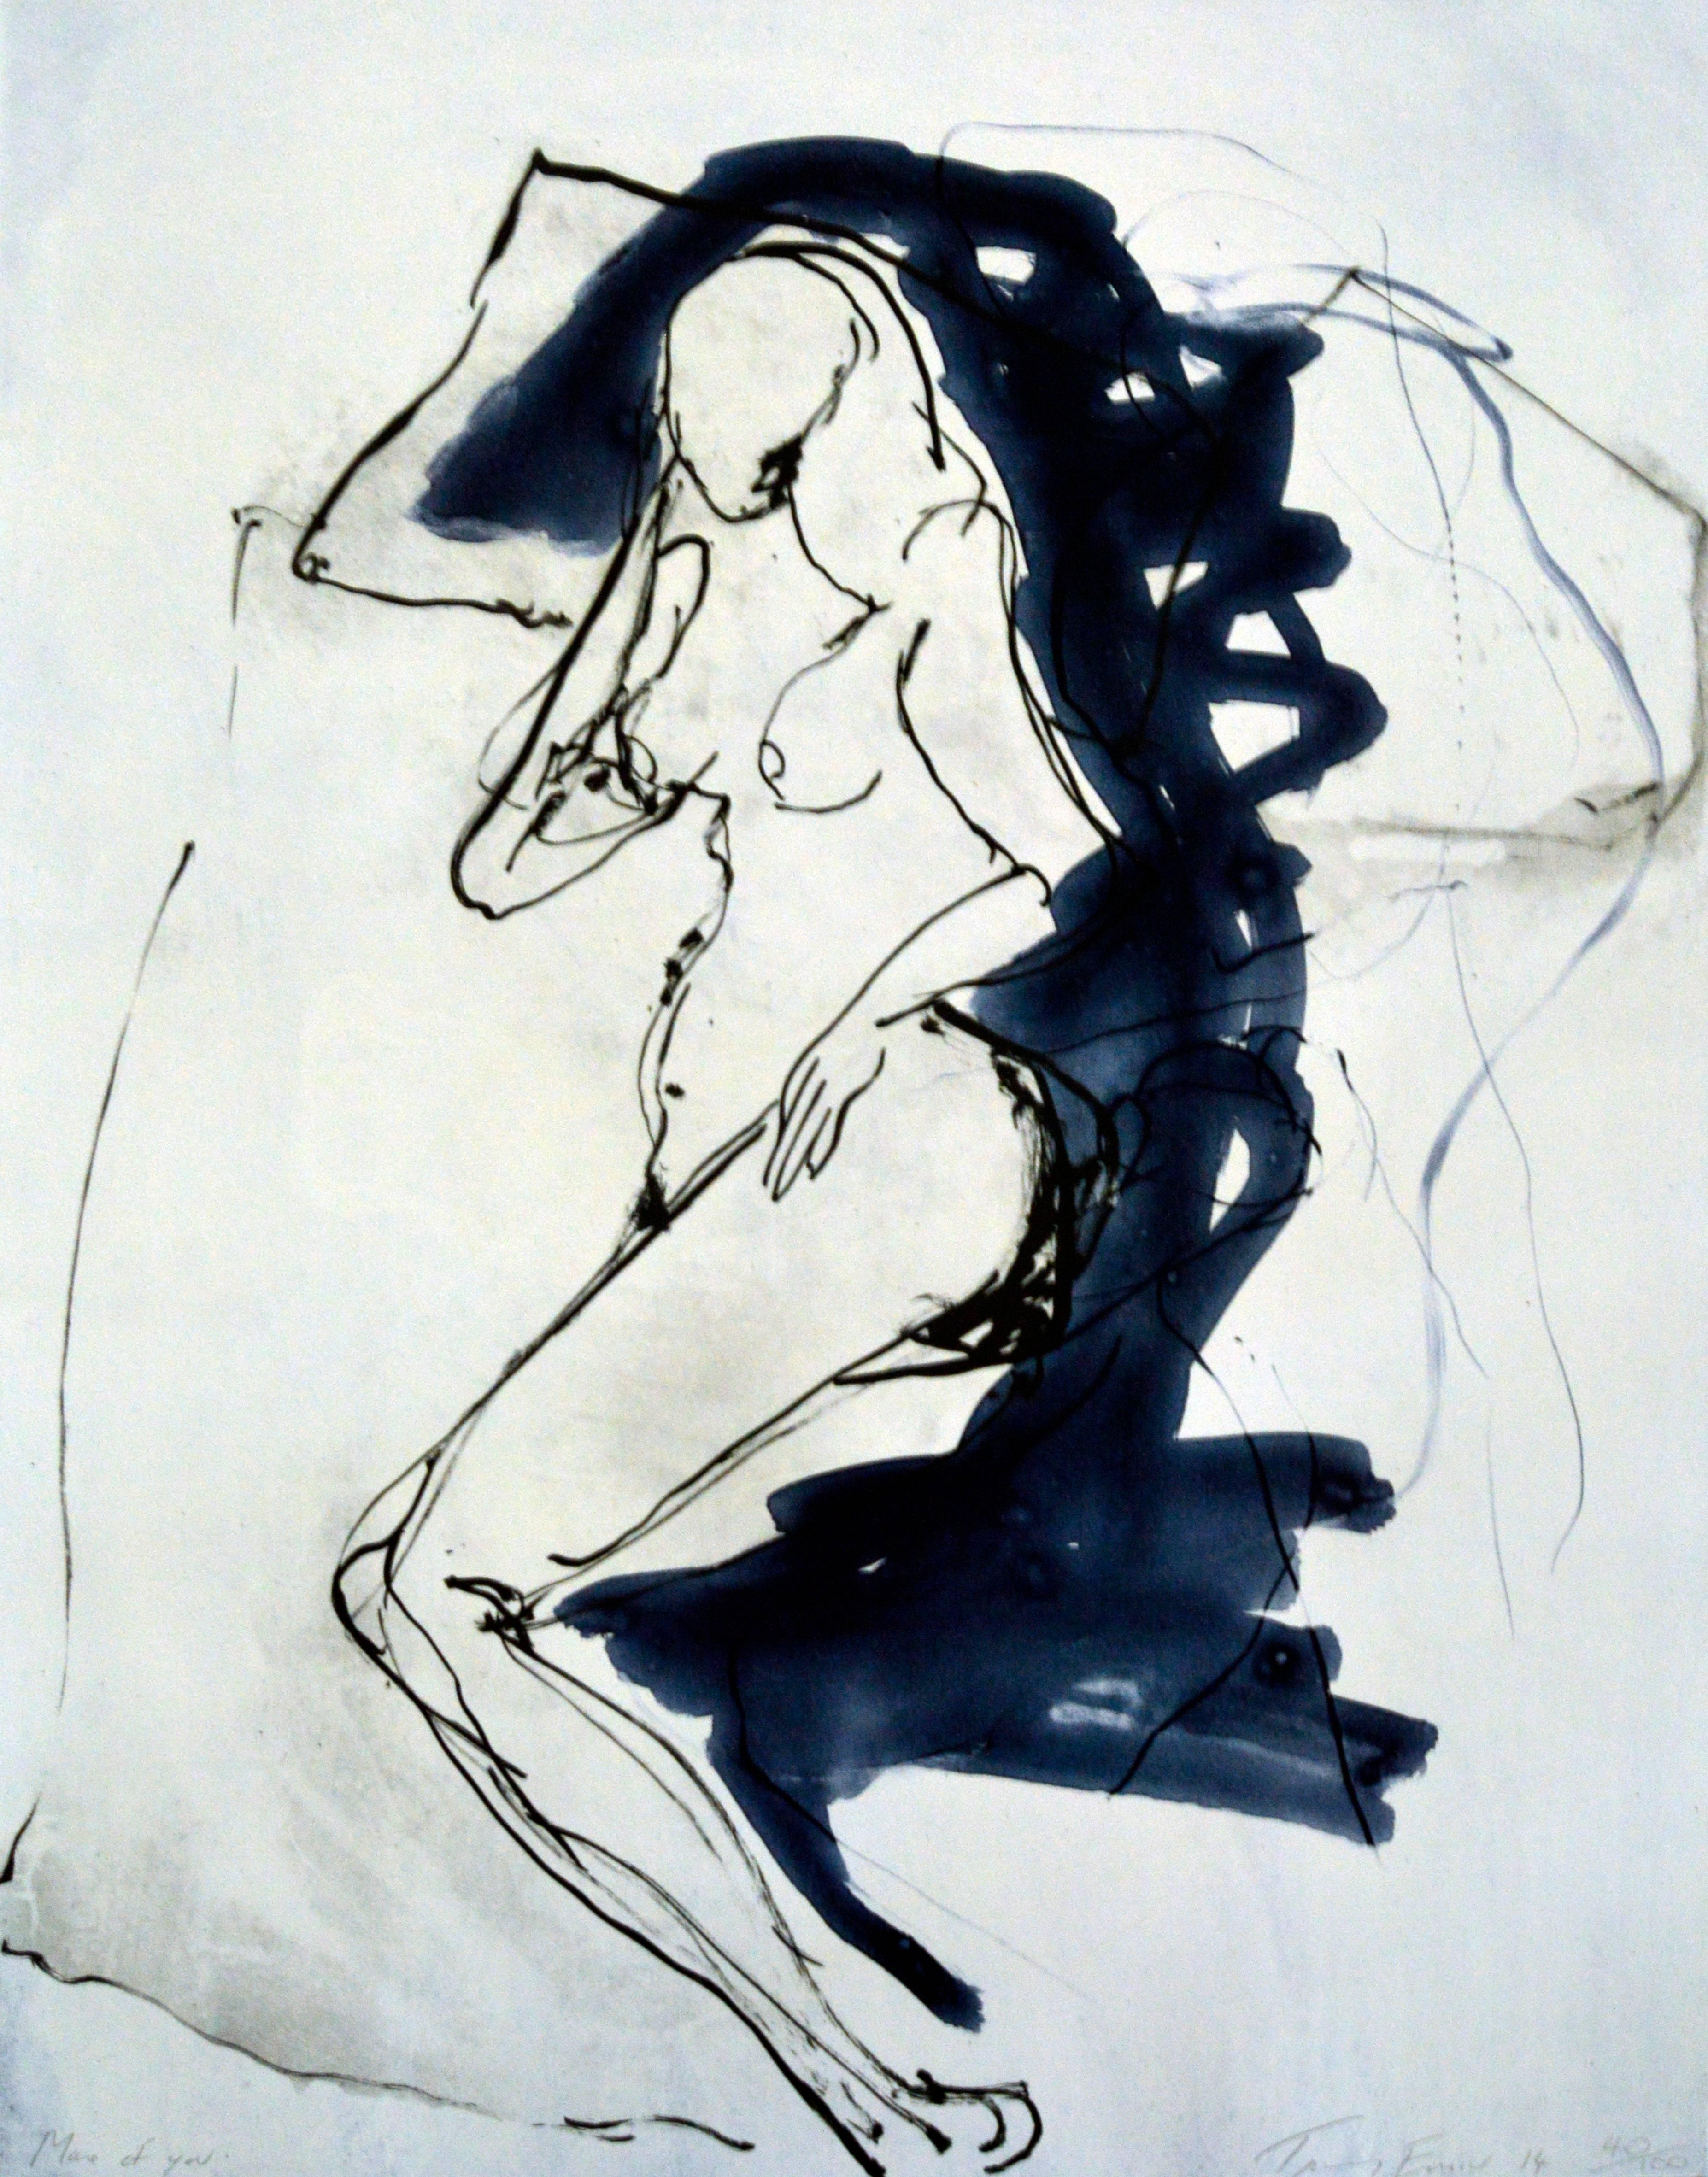 Tracey Emin Nude Print - More of You - Limited Edition Lithograph 40 of 100